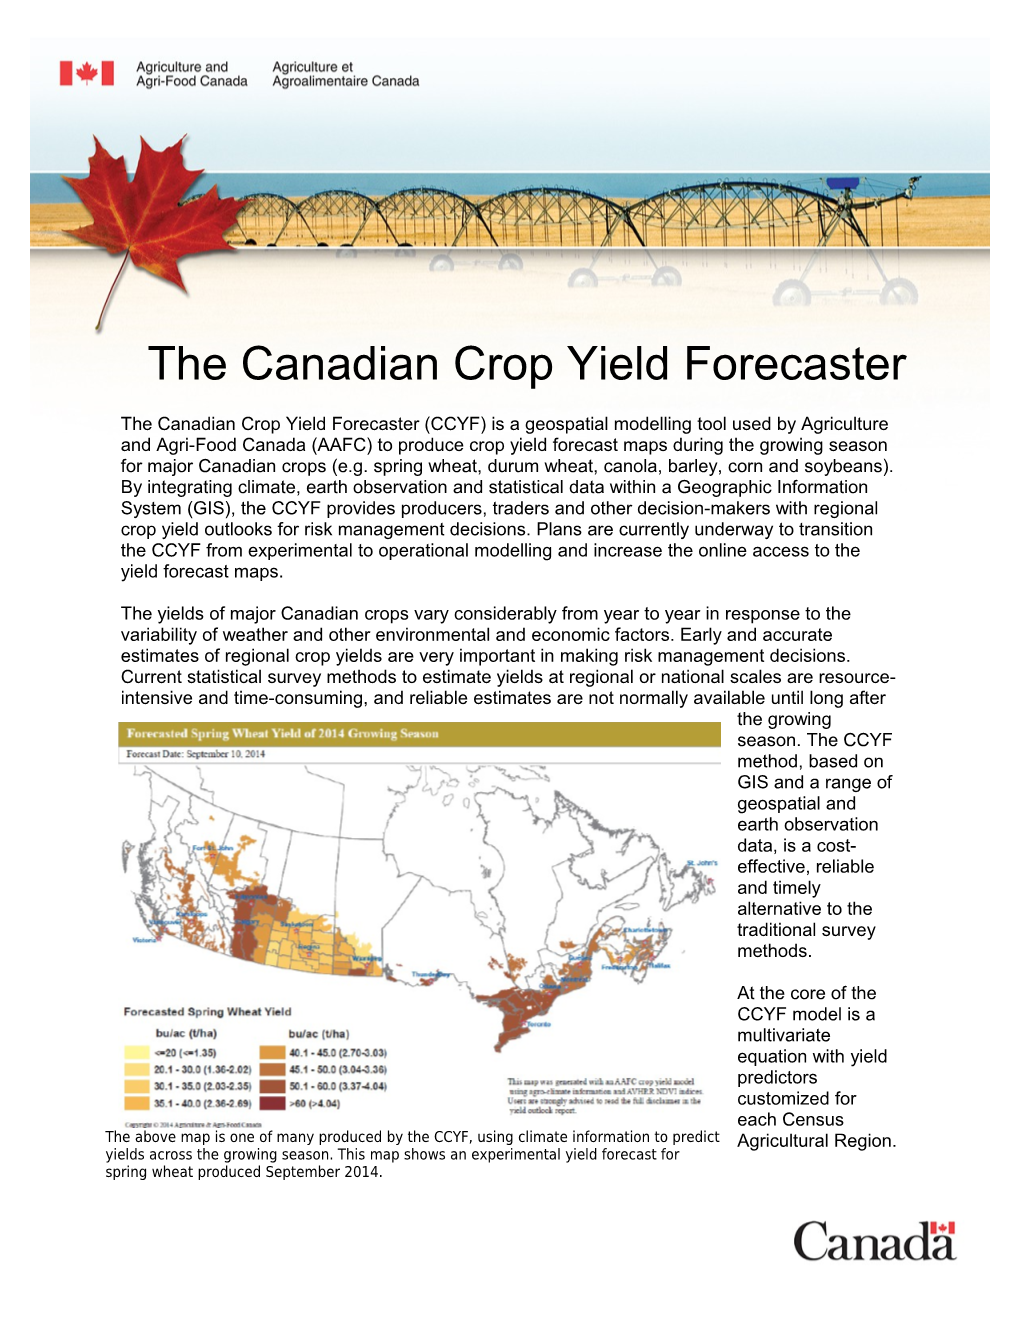 The Canadian Crop Yield Forecaster